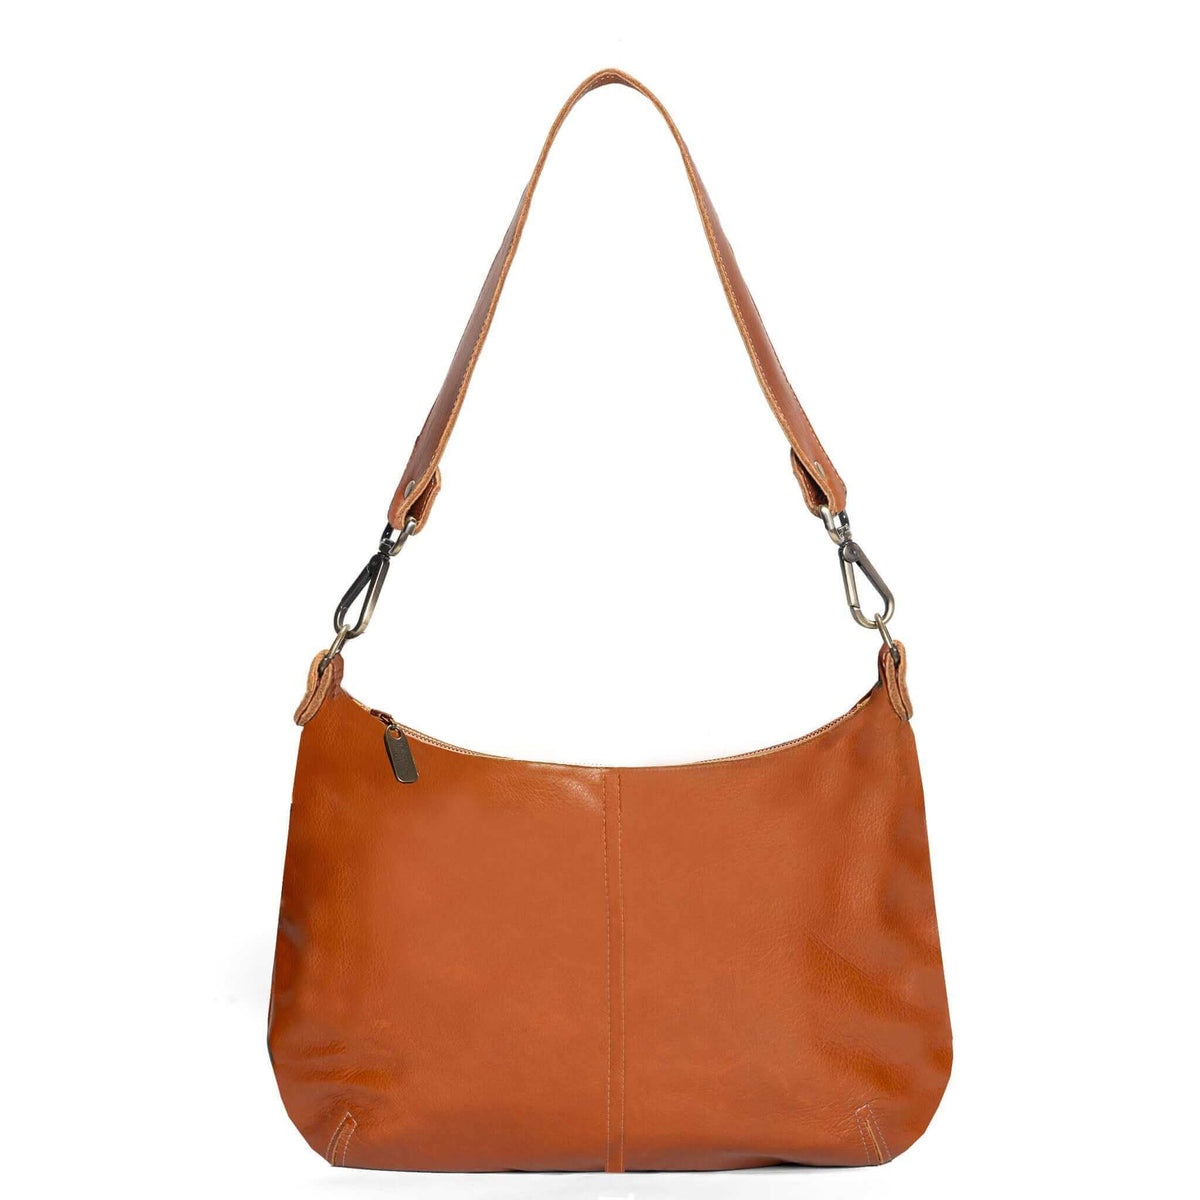 Rust leather Hobo Crossbody, Brynn Capella , Aniline Leather, pull-up leather